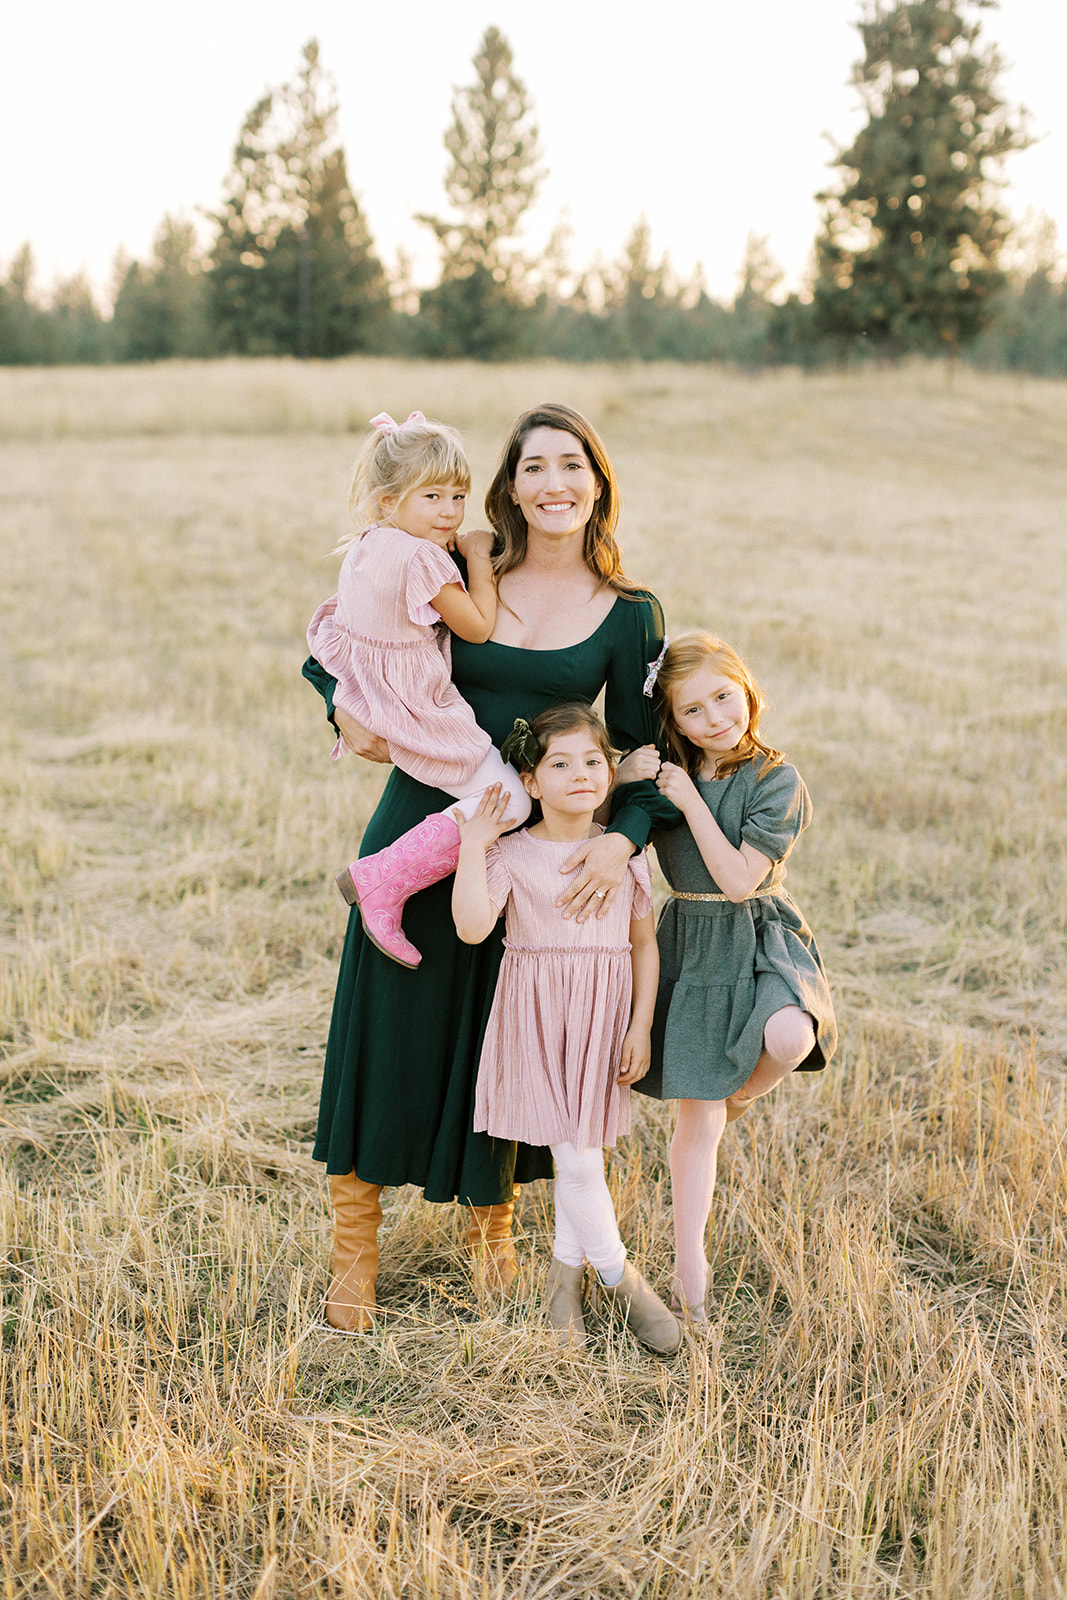 Mother with three daughters portrait in open field at sunset in Spokane, Washington.